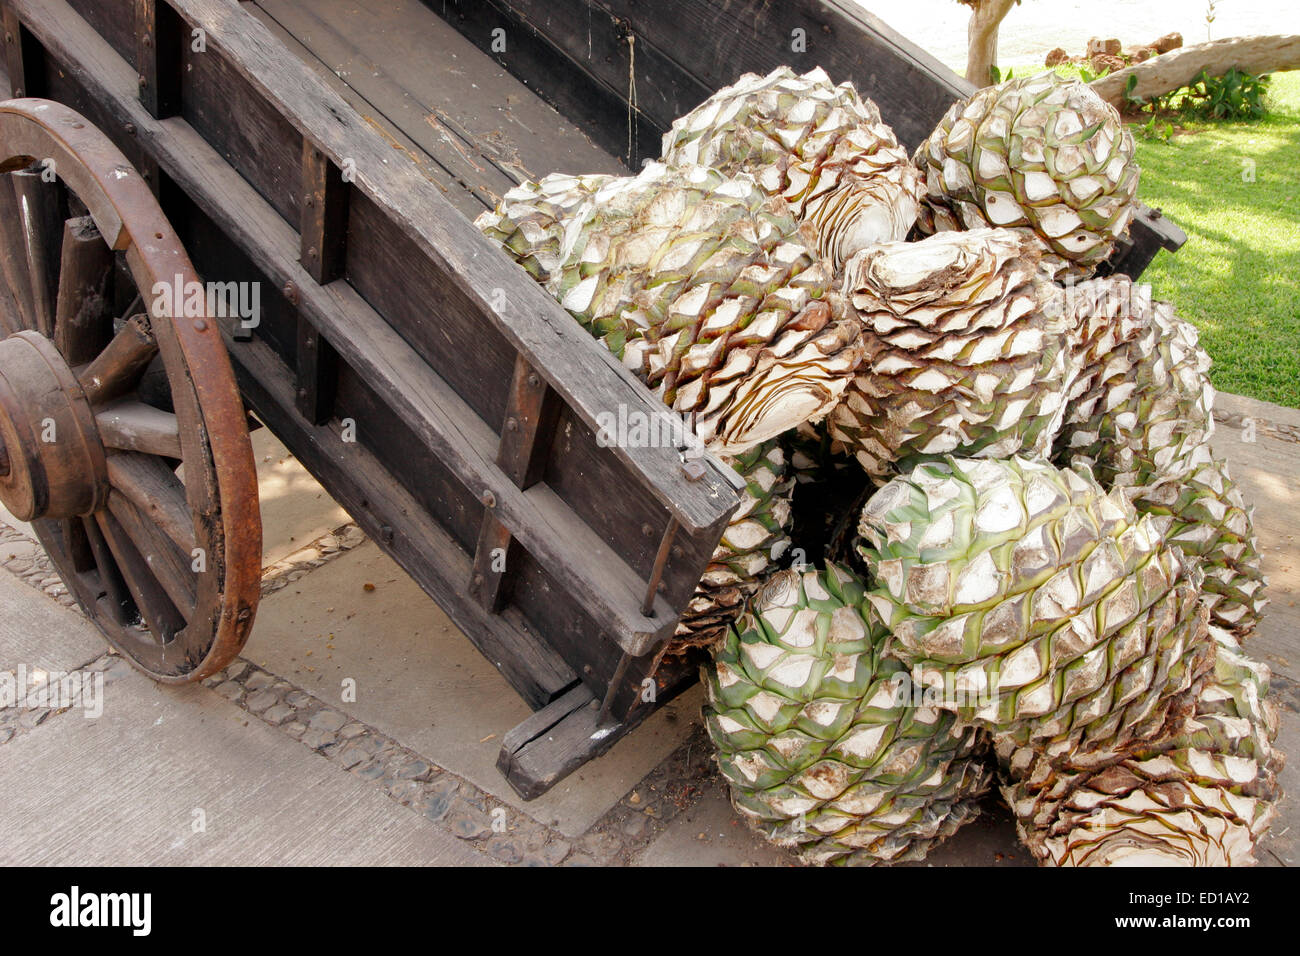 A mature agave pina weighs from 20 - 40kg (50-100 lbs) and each will yield an average of 5-7 liters of tequila. Jalisco, Mexico Stock Photo